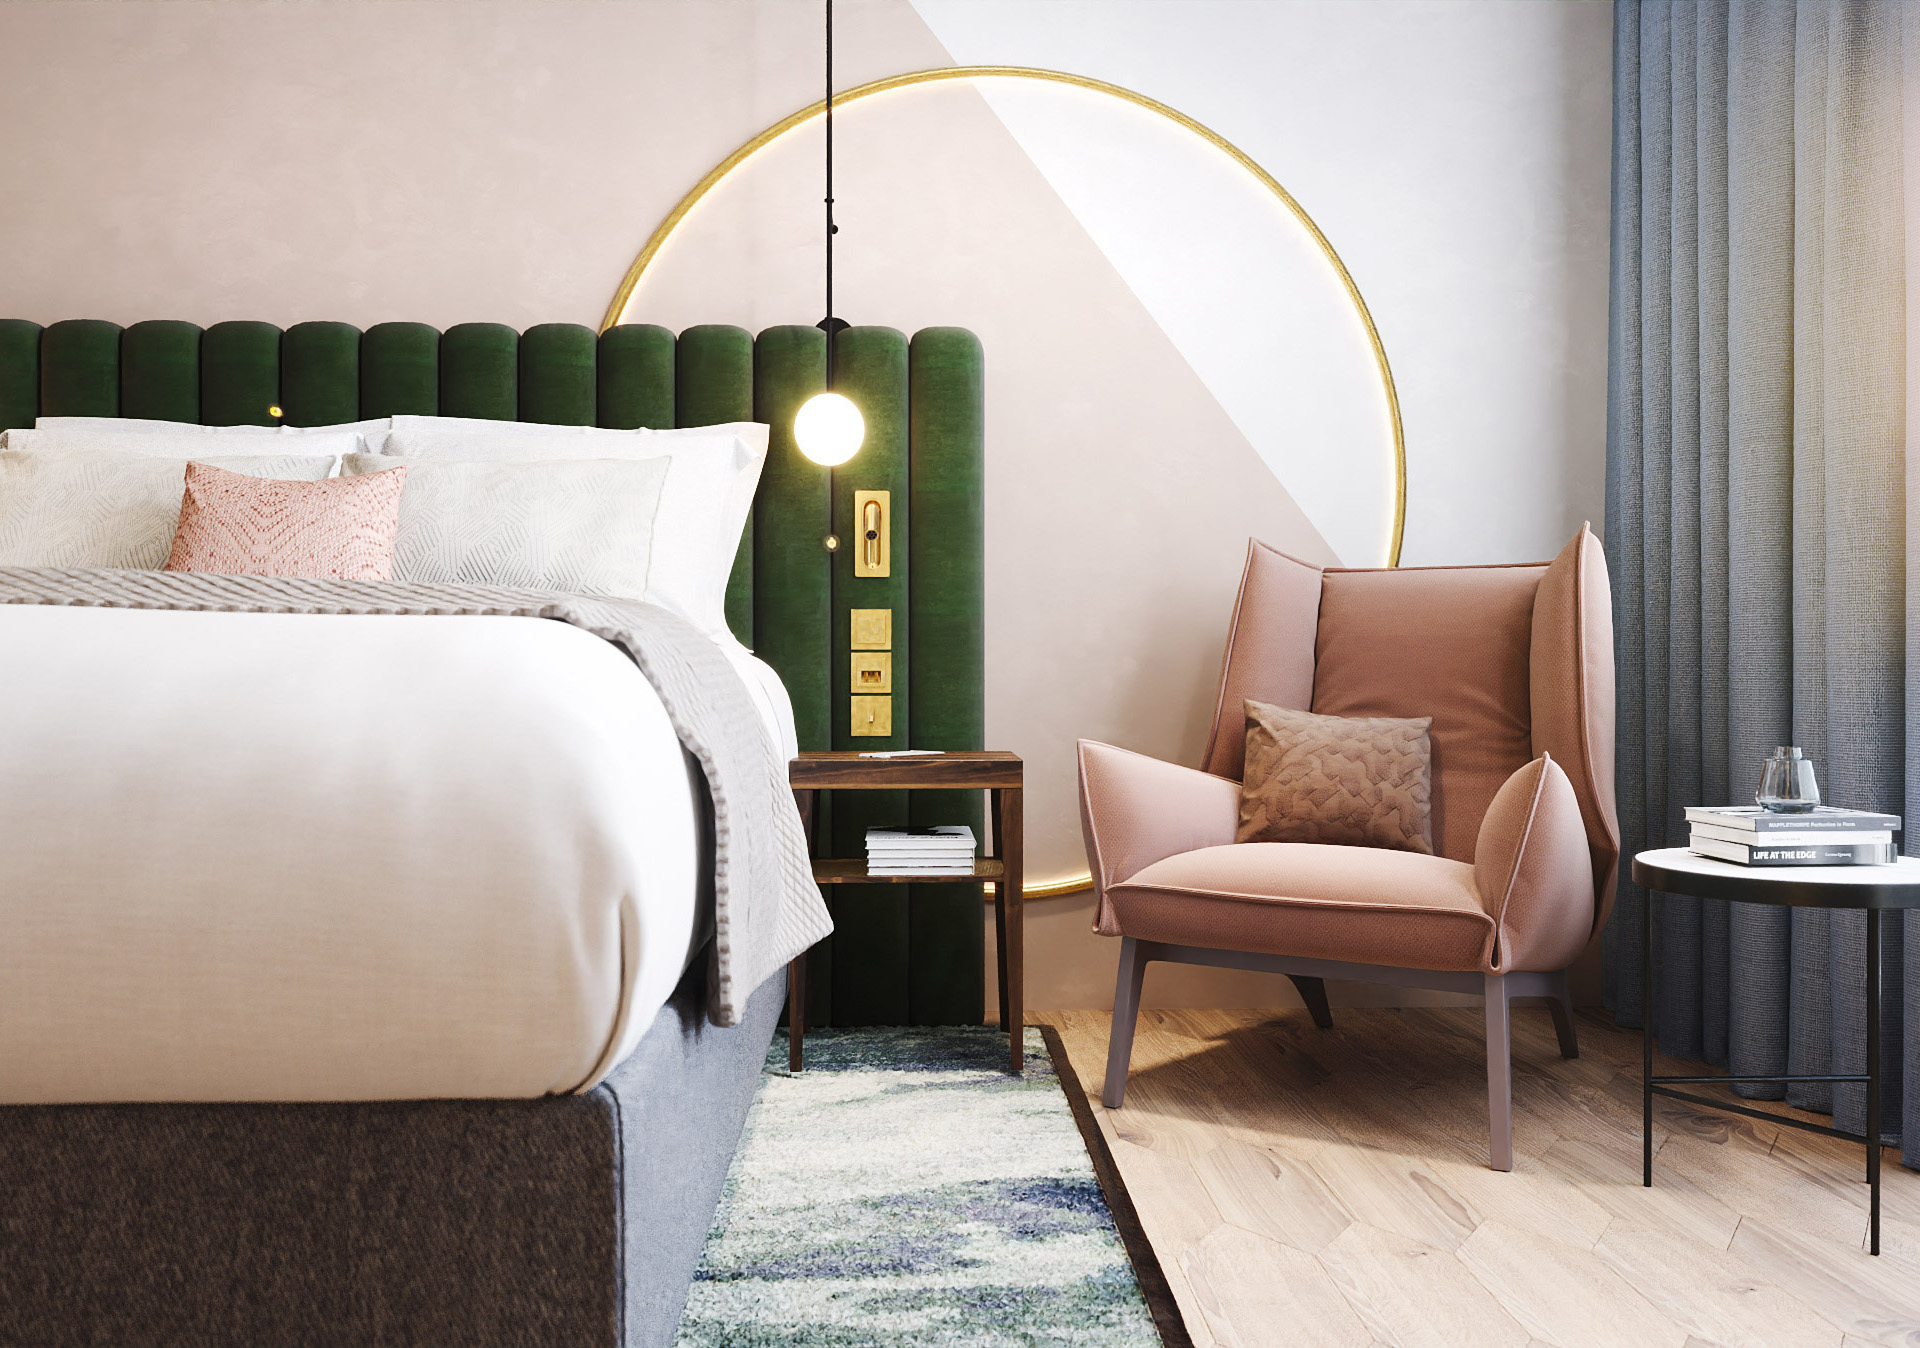 3D Visual detail of a bedroom in Hotel Indigo Clerkenwell featuring a green headboard, pink lounge chair, light, inviting and relaxing room atmosphere, IHG hotels and resorts modern hotel interior design by 3Stories Interior Design and branding creative agency.